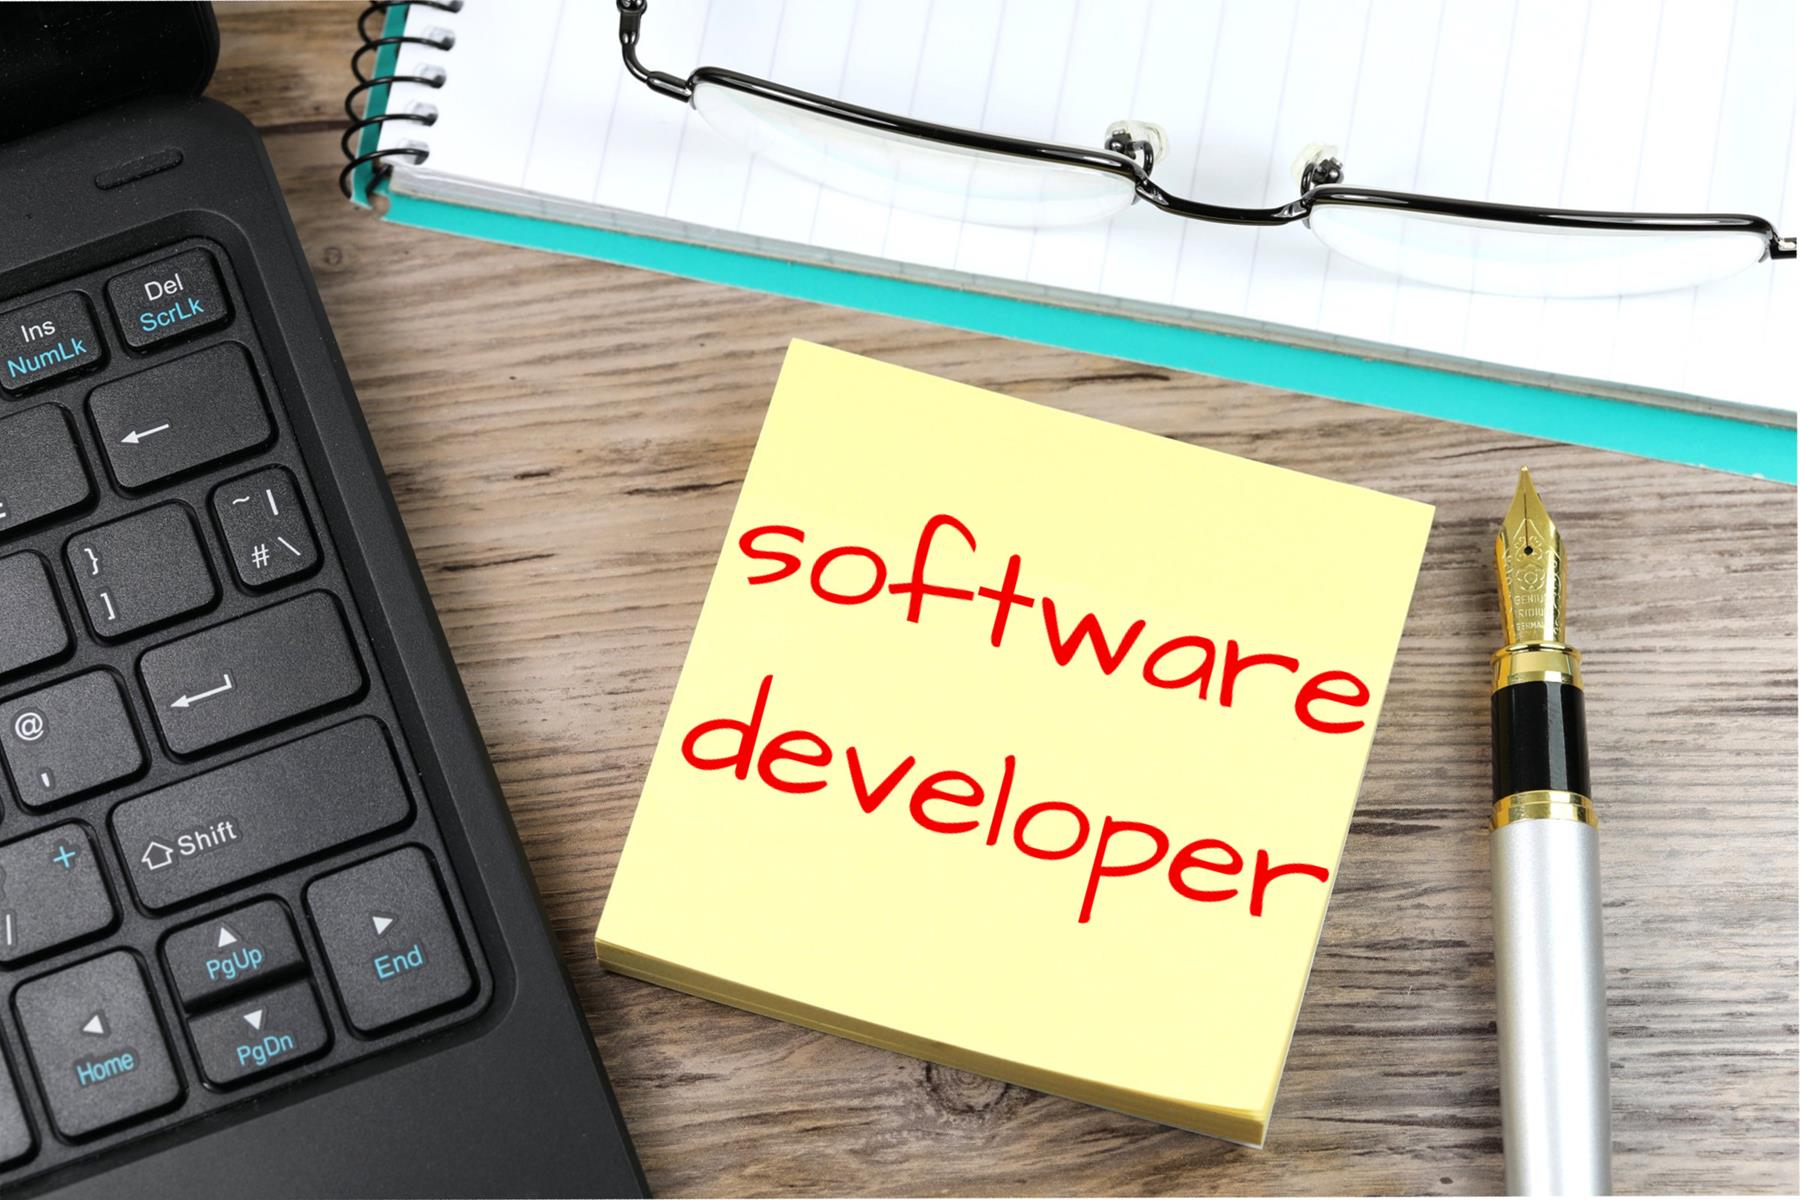 software-developer-free-of-charge-creative-commons-post-it-note-image